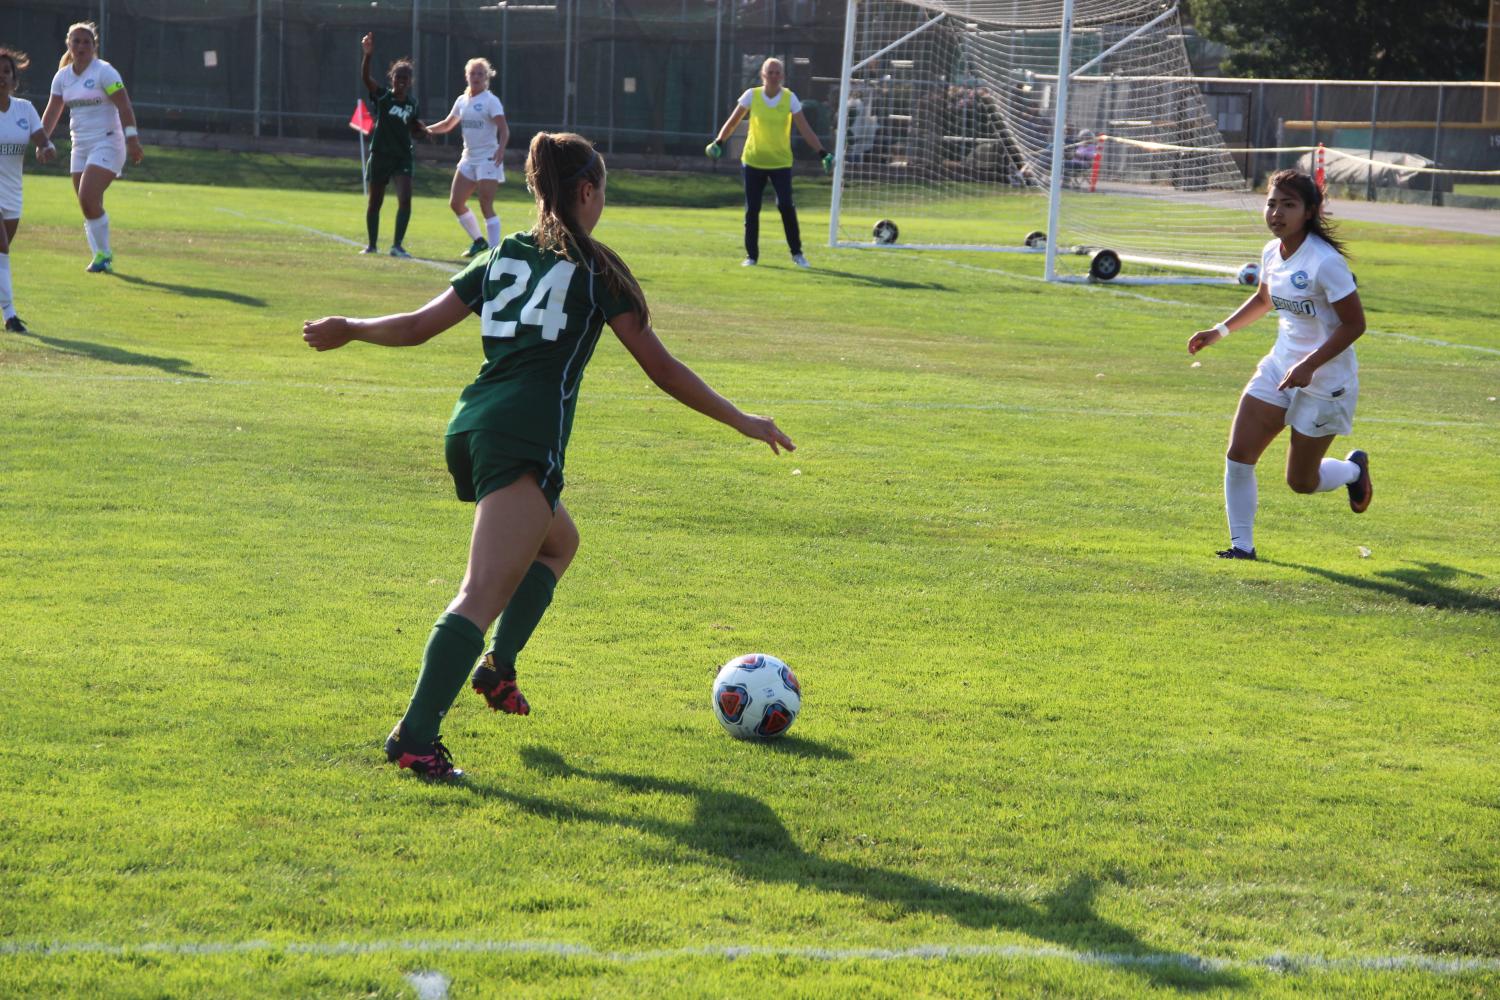 Freshman Meredith Thomason and the DVC soccer team had their best game of the season, beating Cabrillo 9-0 on Sept. 8.